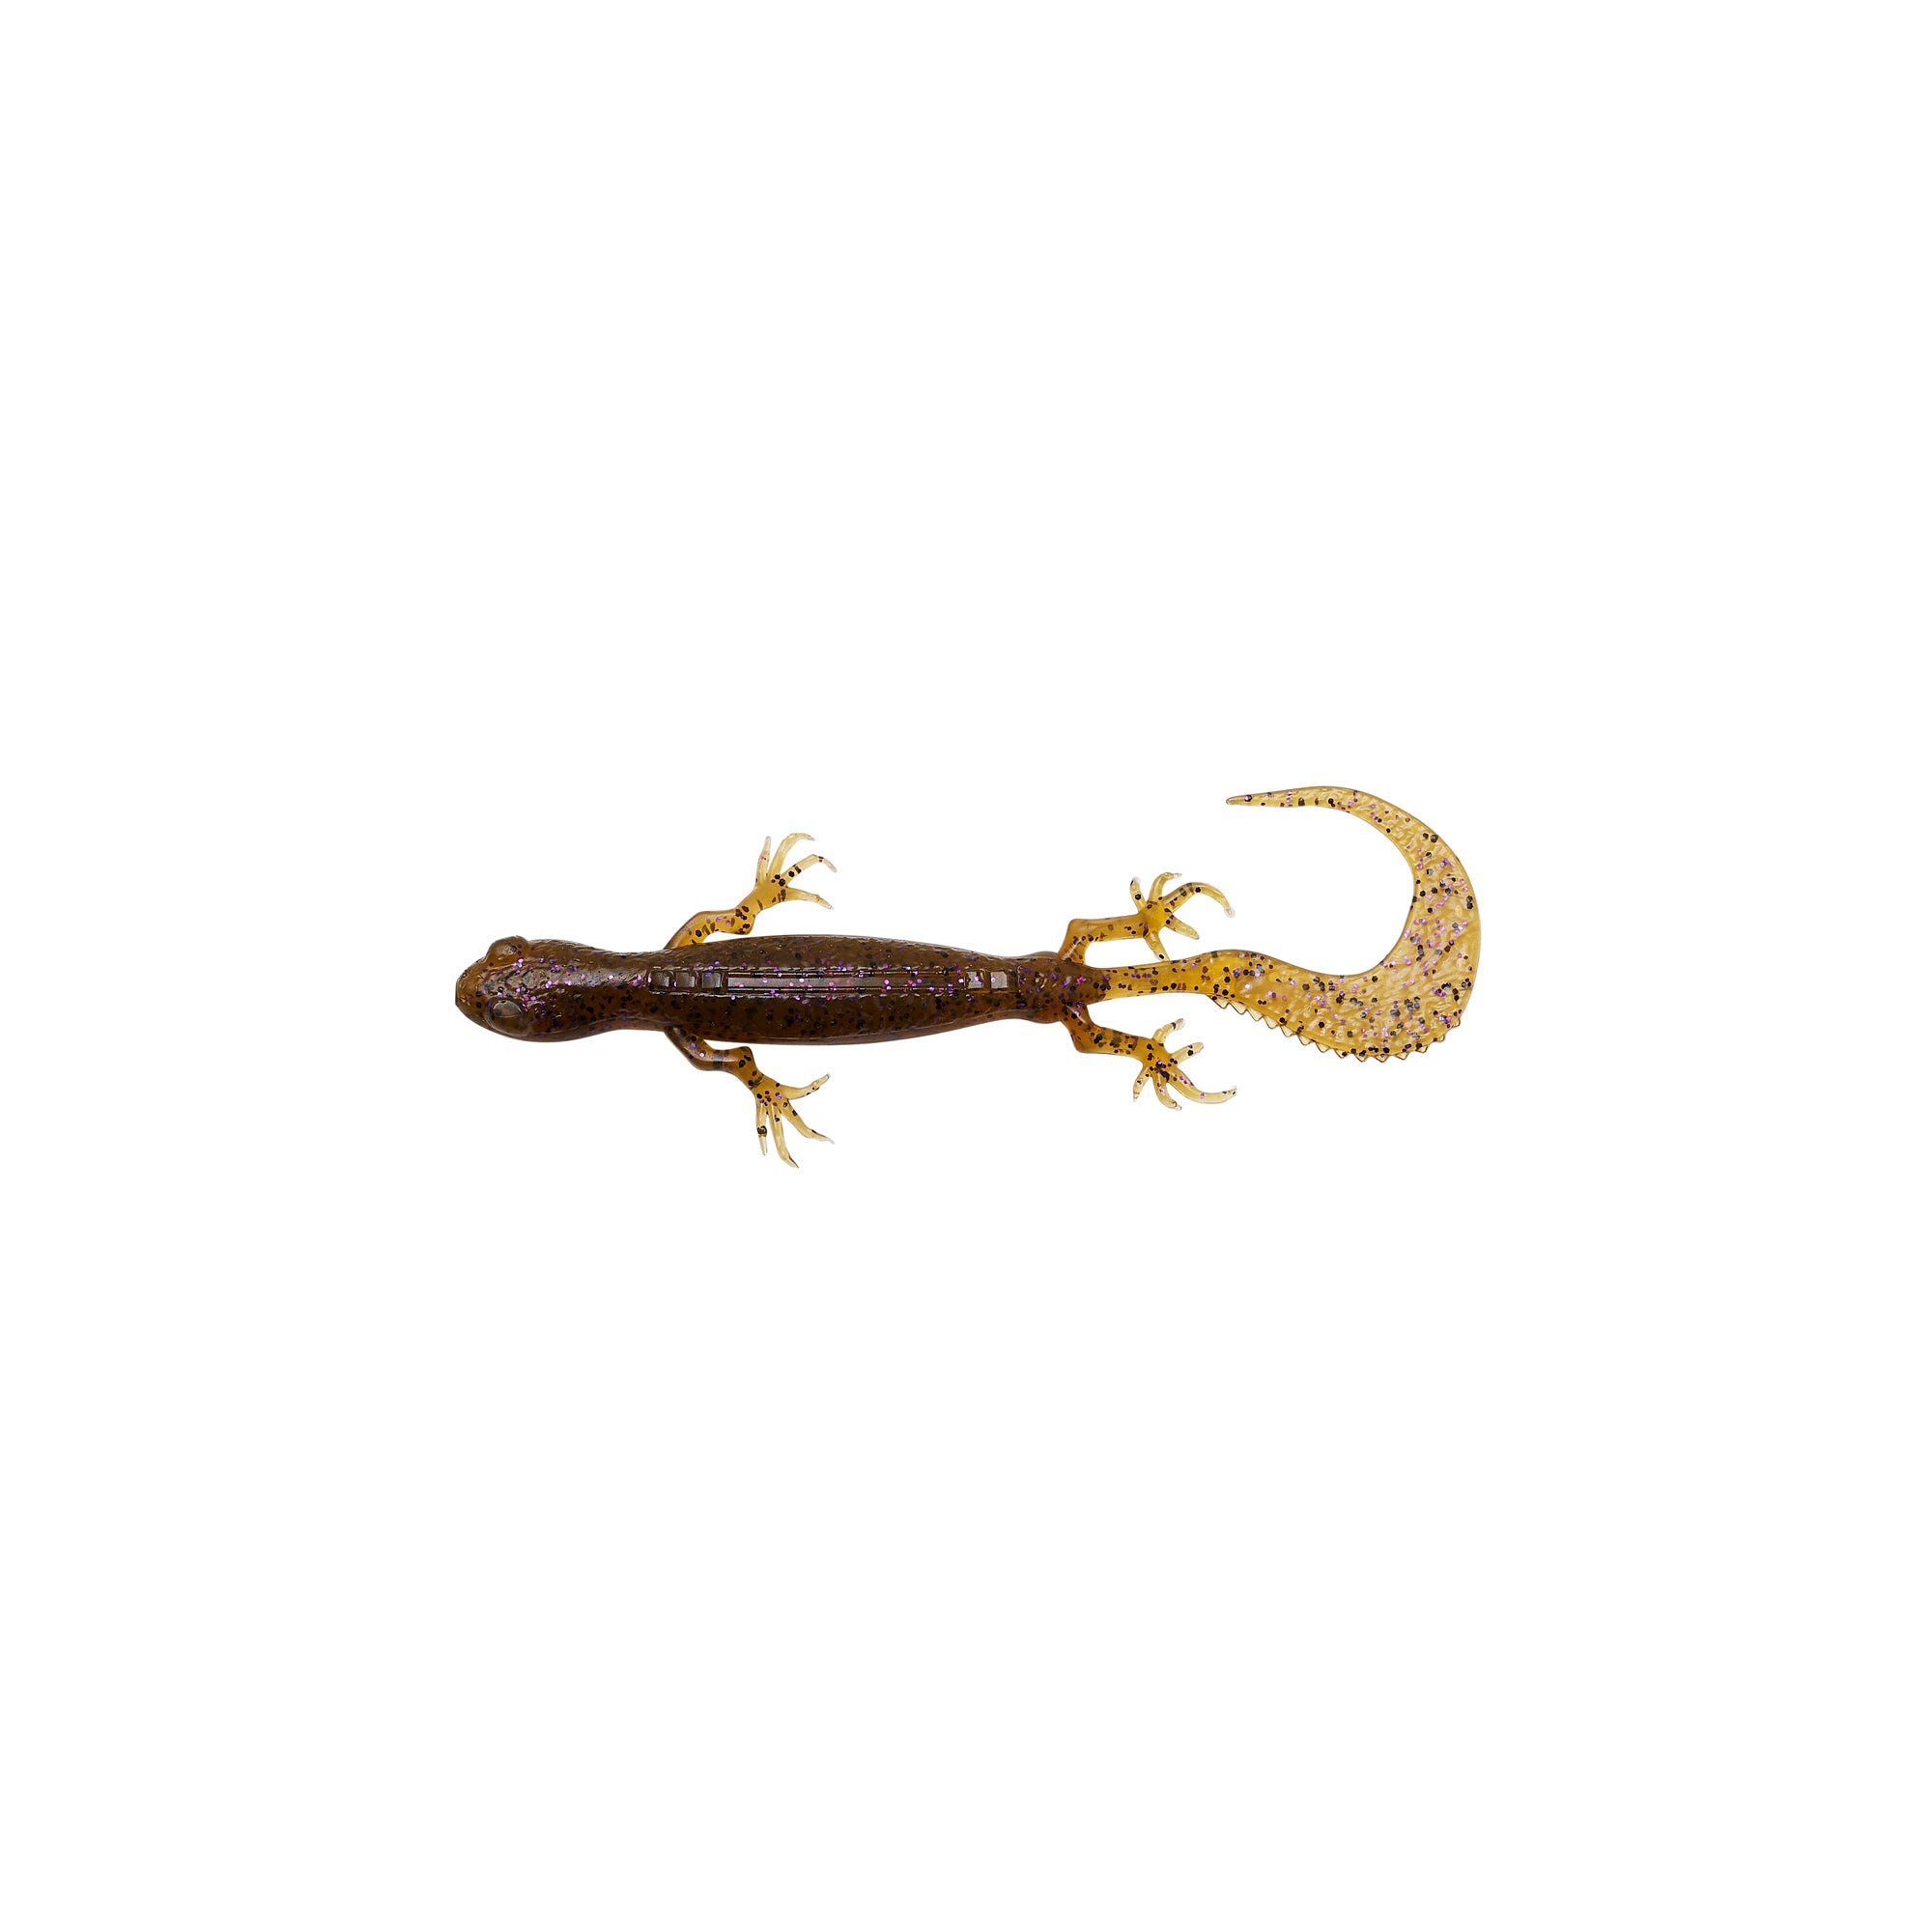 Savage Gear Hop Popper Frog Lures